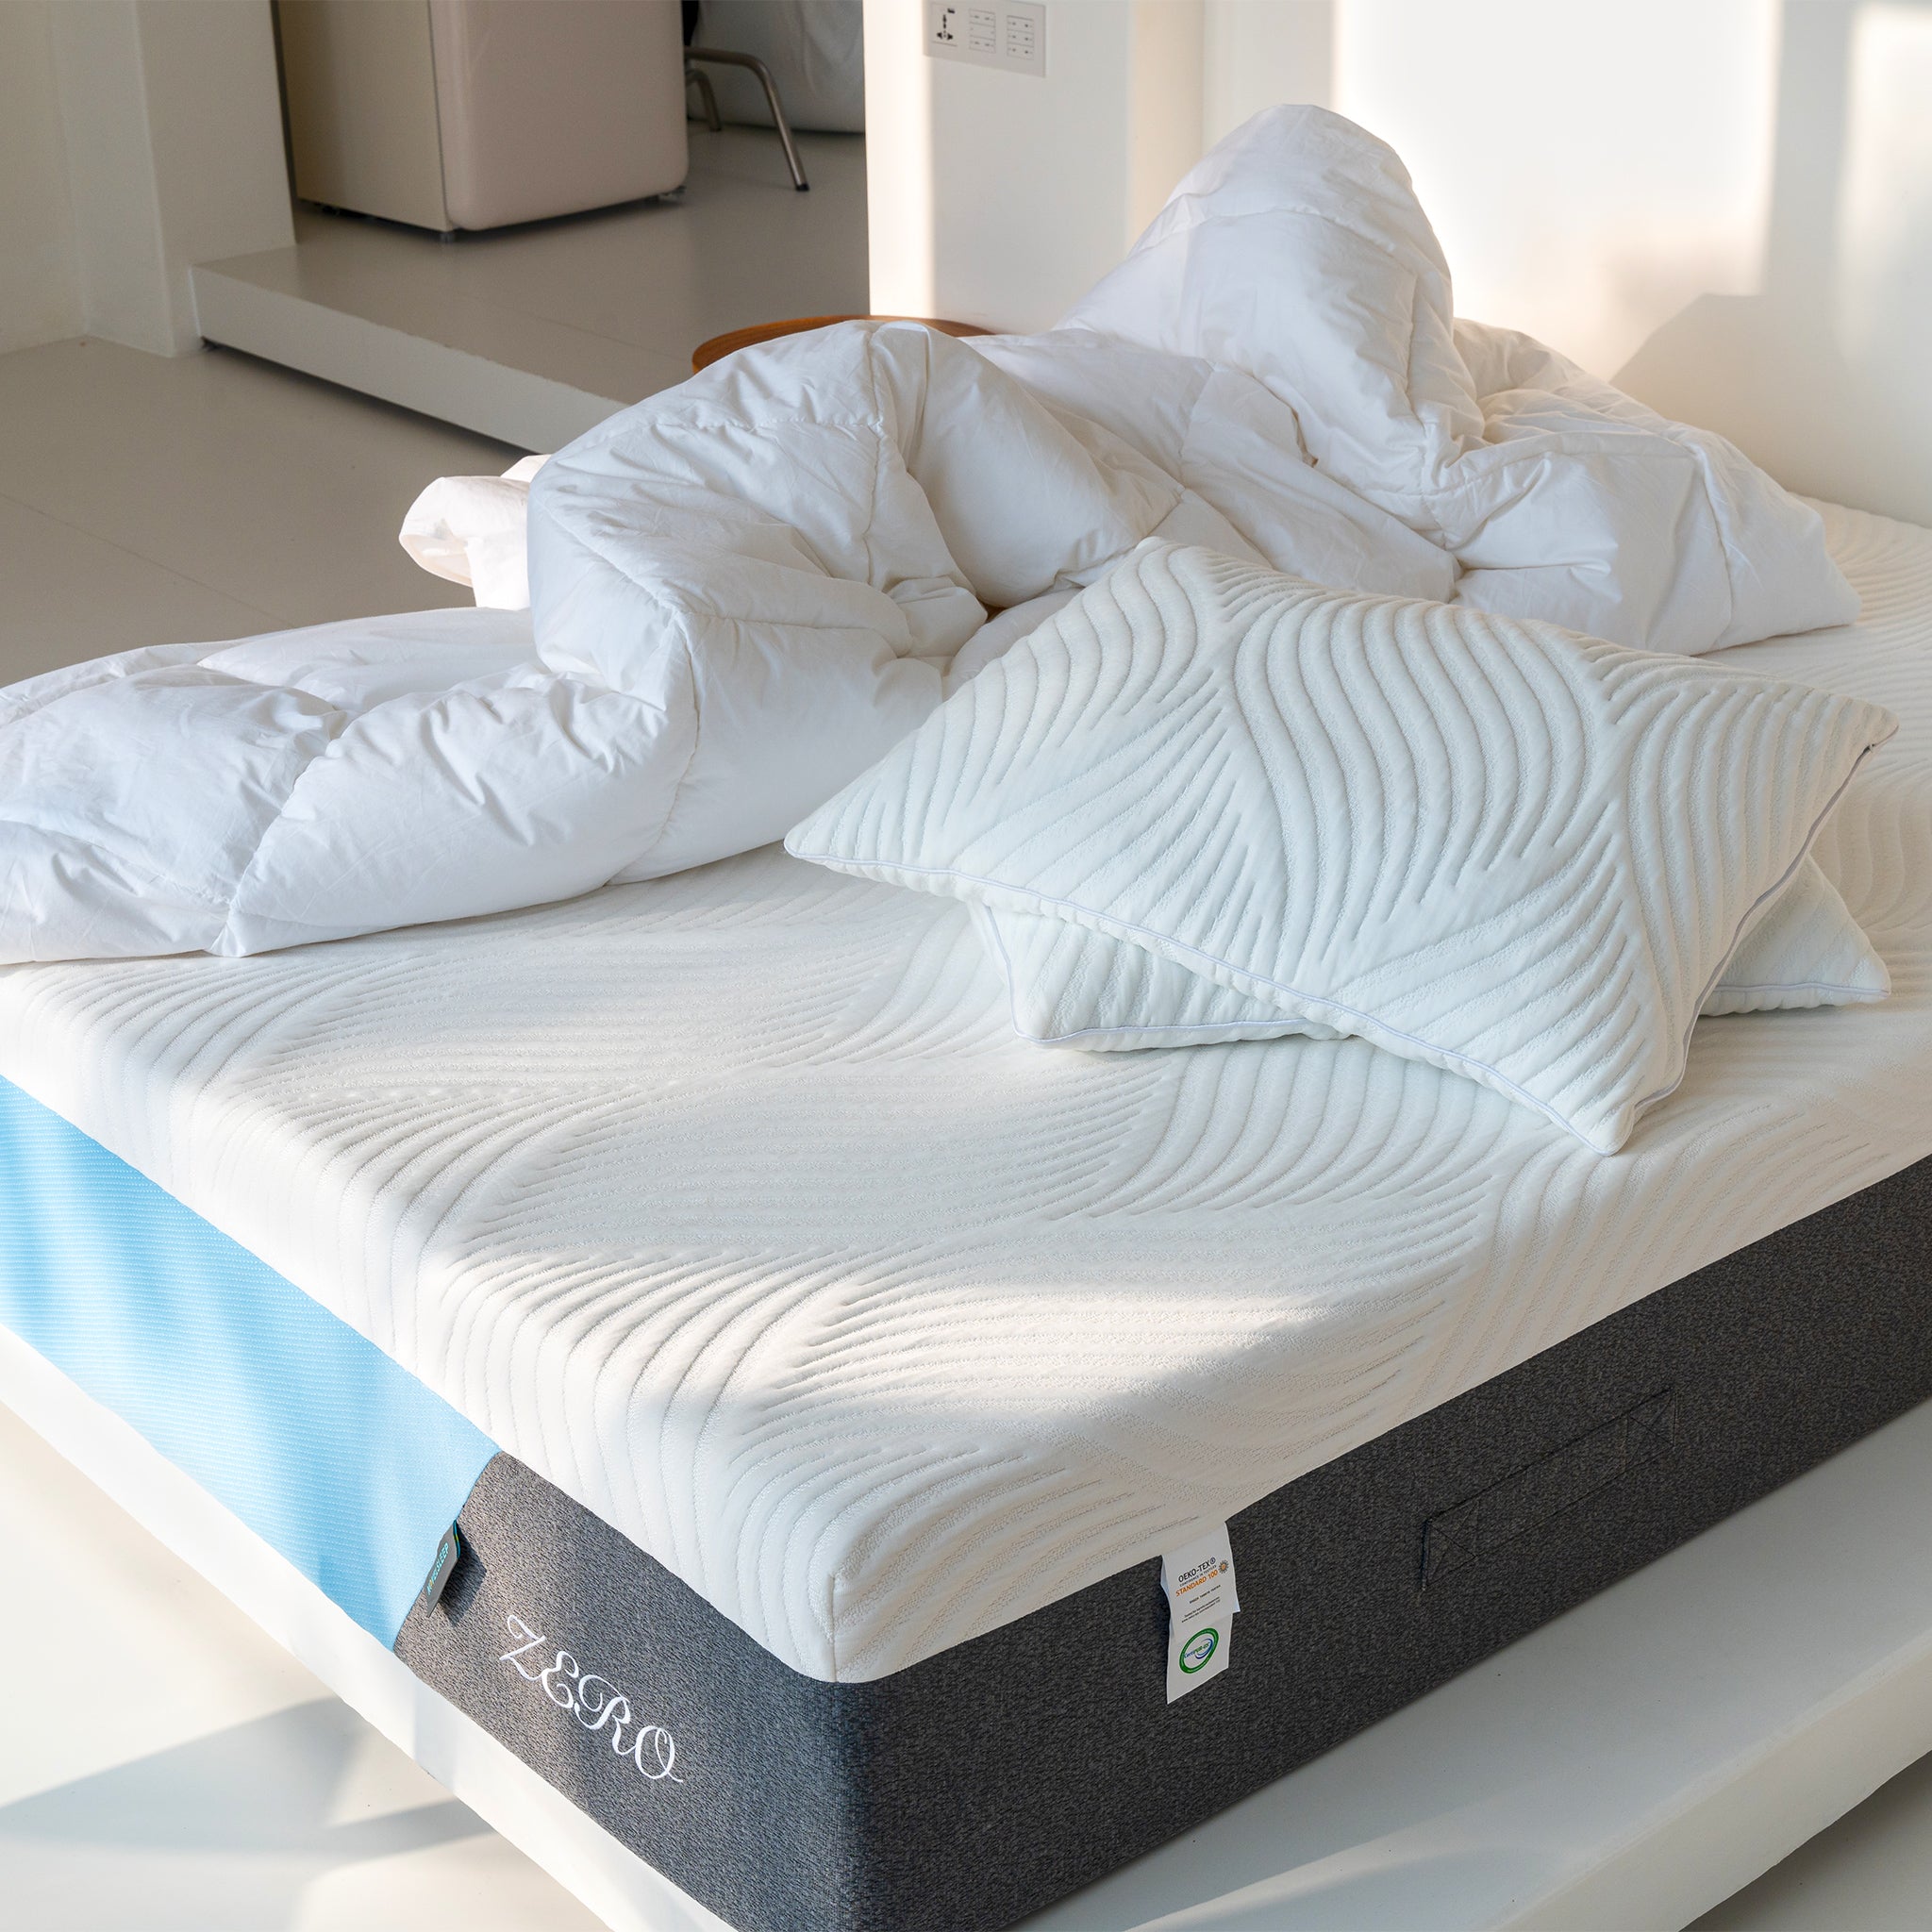 Mino Zero 12 Inch Cooling Mattress Studio with Pillows and Comforter